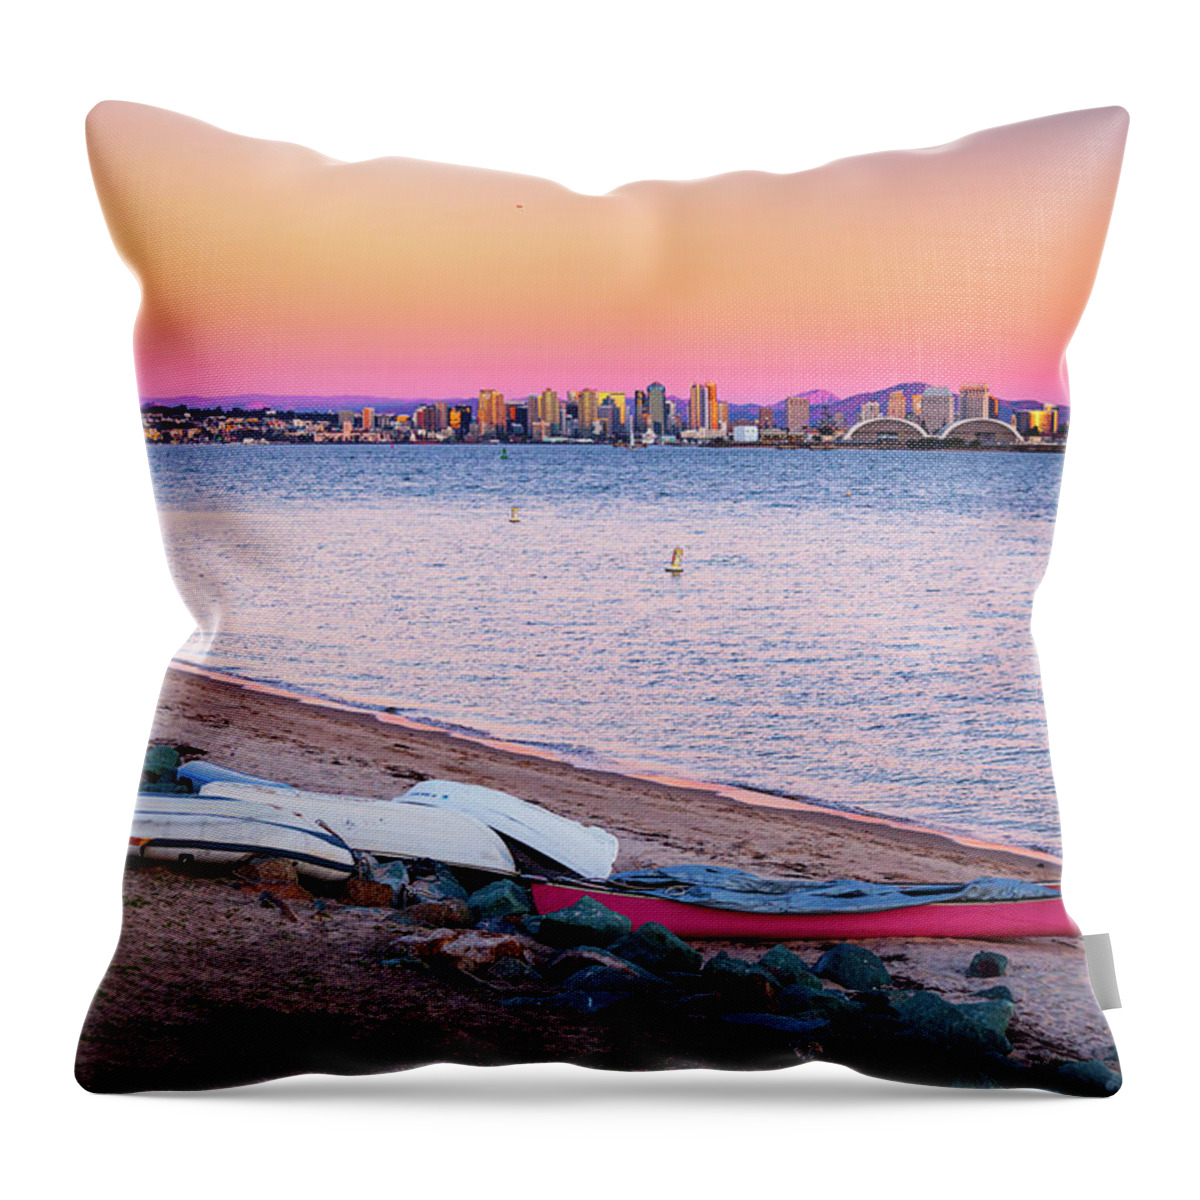 Cityscape Throw Pillow featuring the photograph San Diego Winter's Night by Ryan Huebel